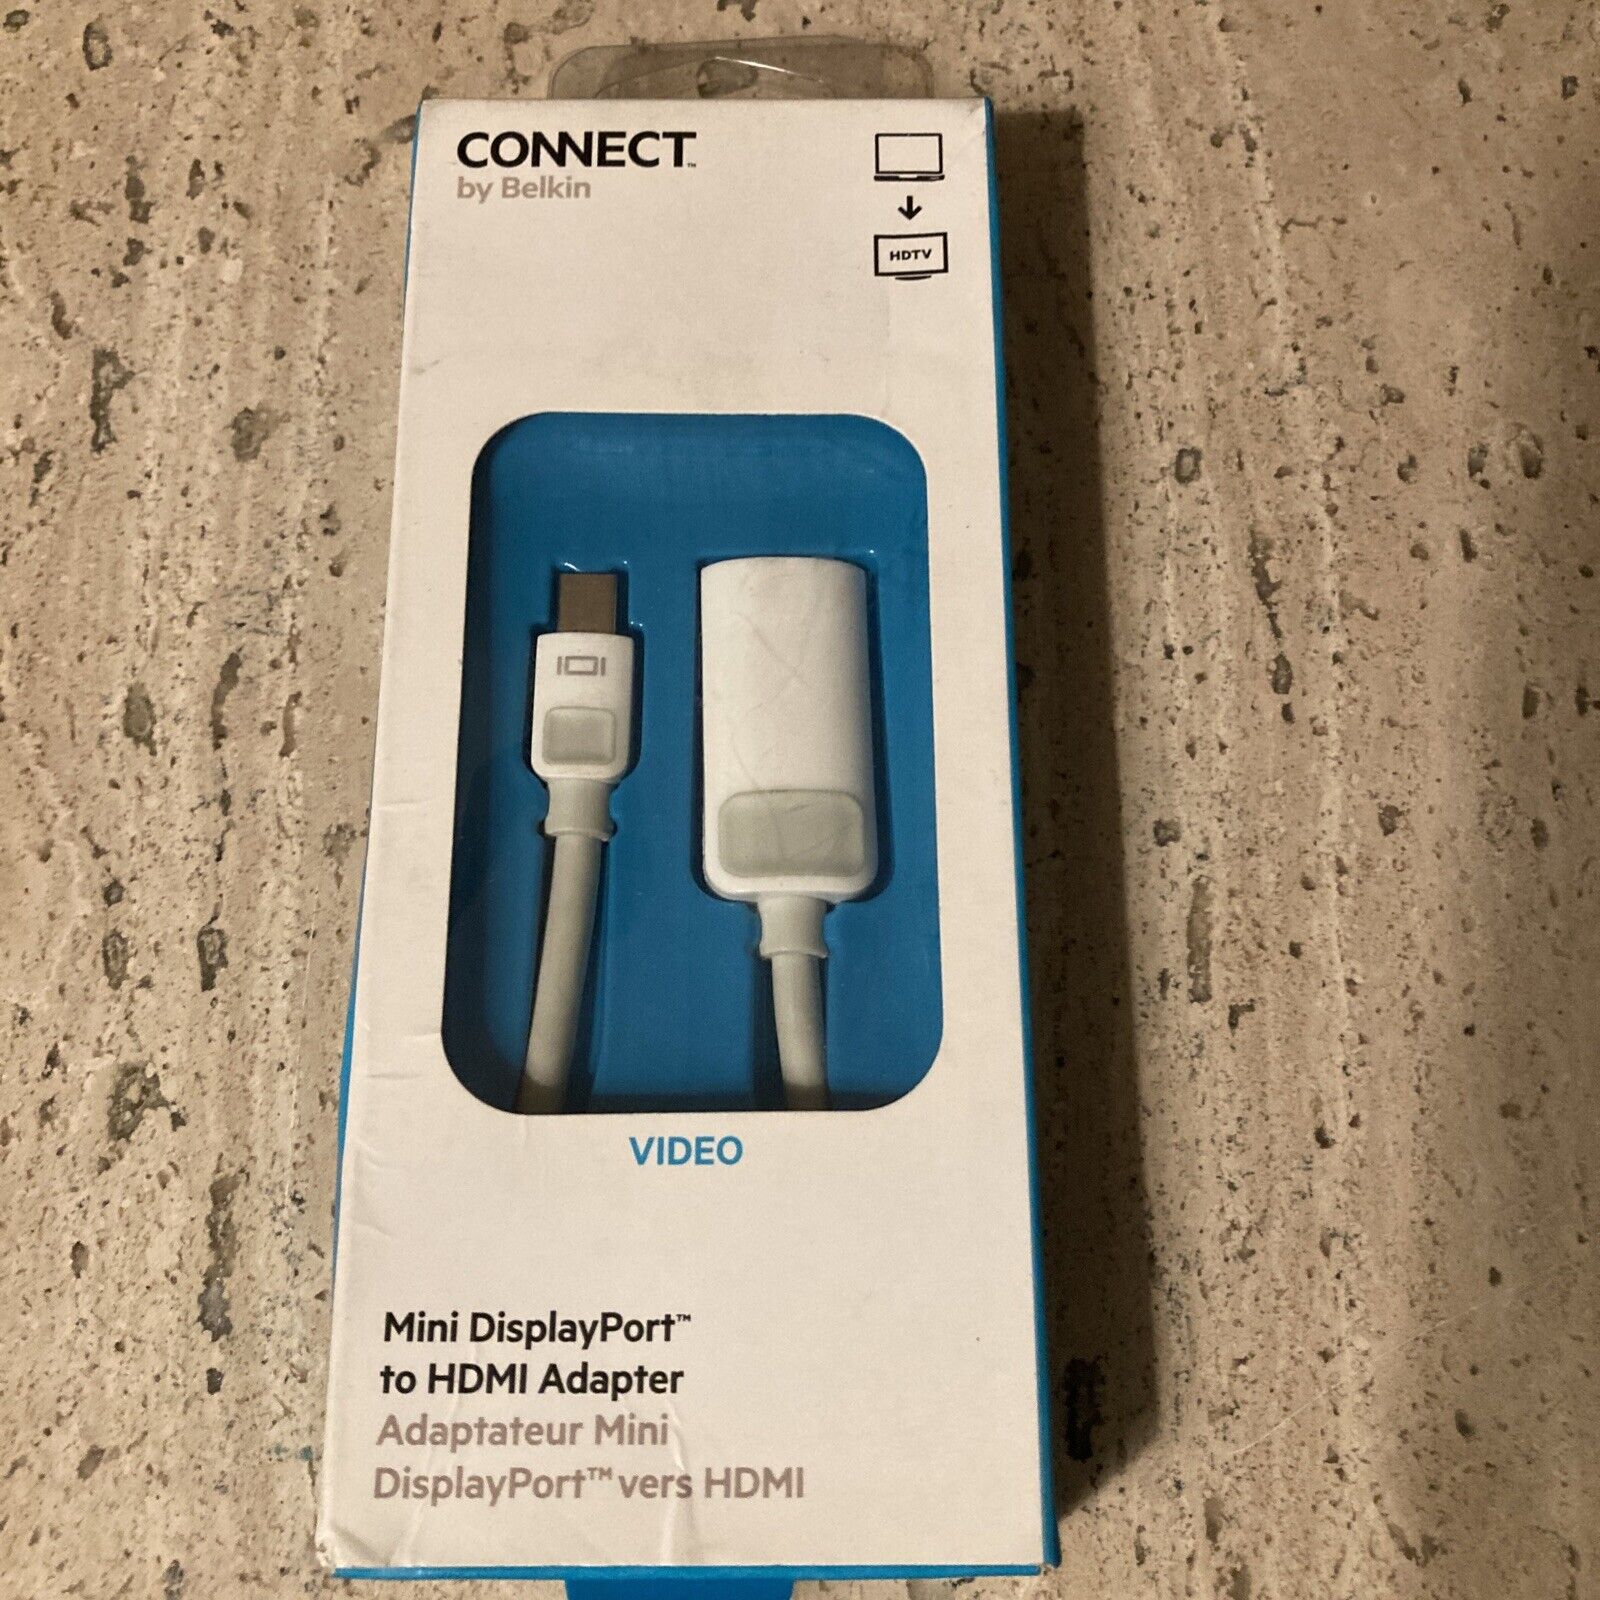  Connect By Belkin Mini DisplayPort to HDMI Adapter - Brand New